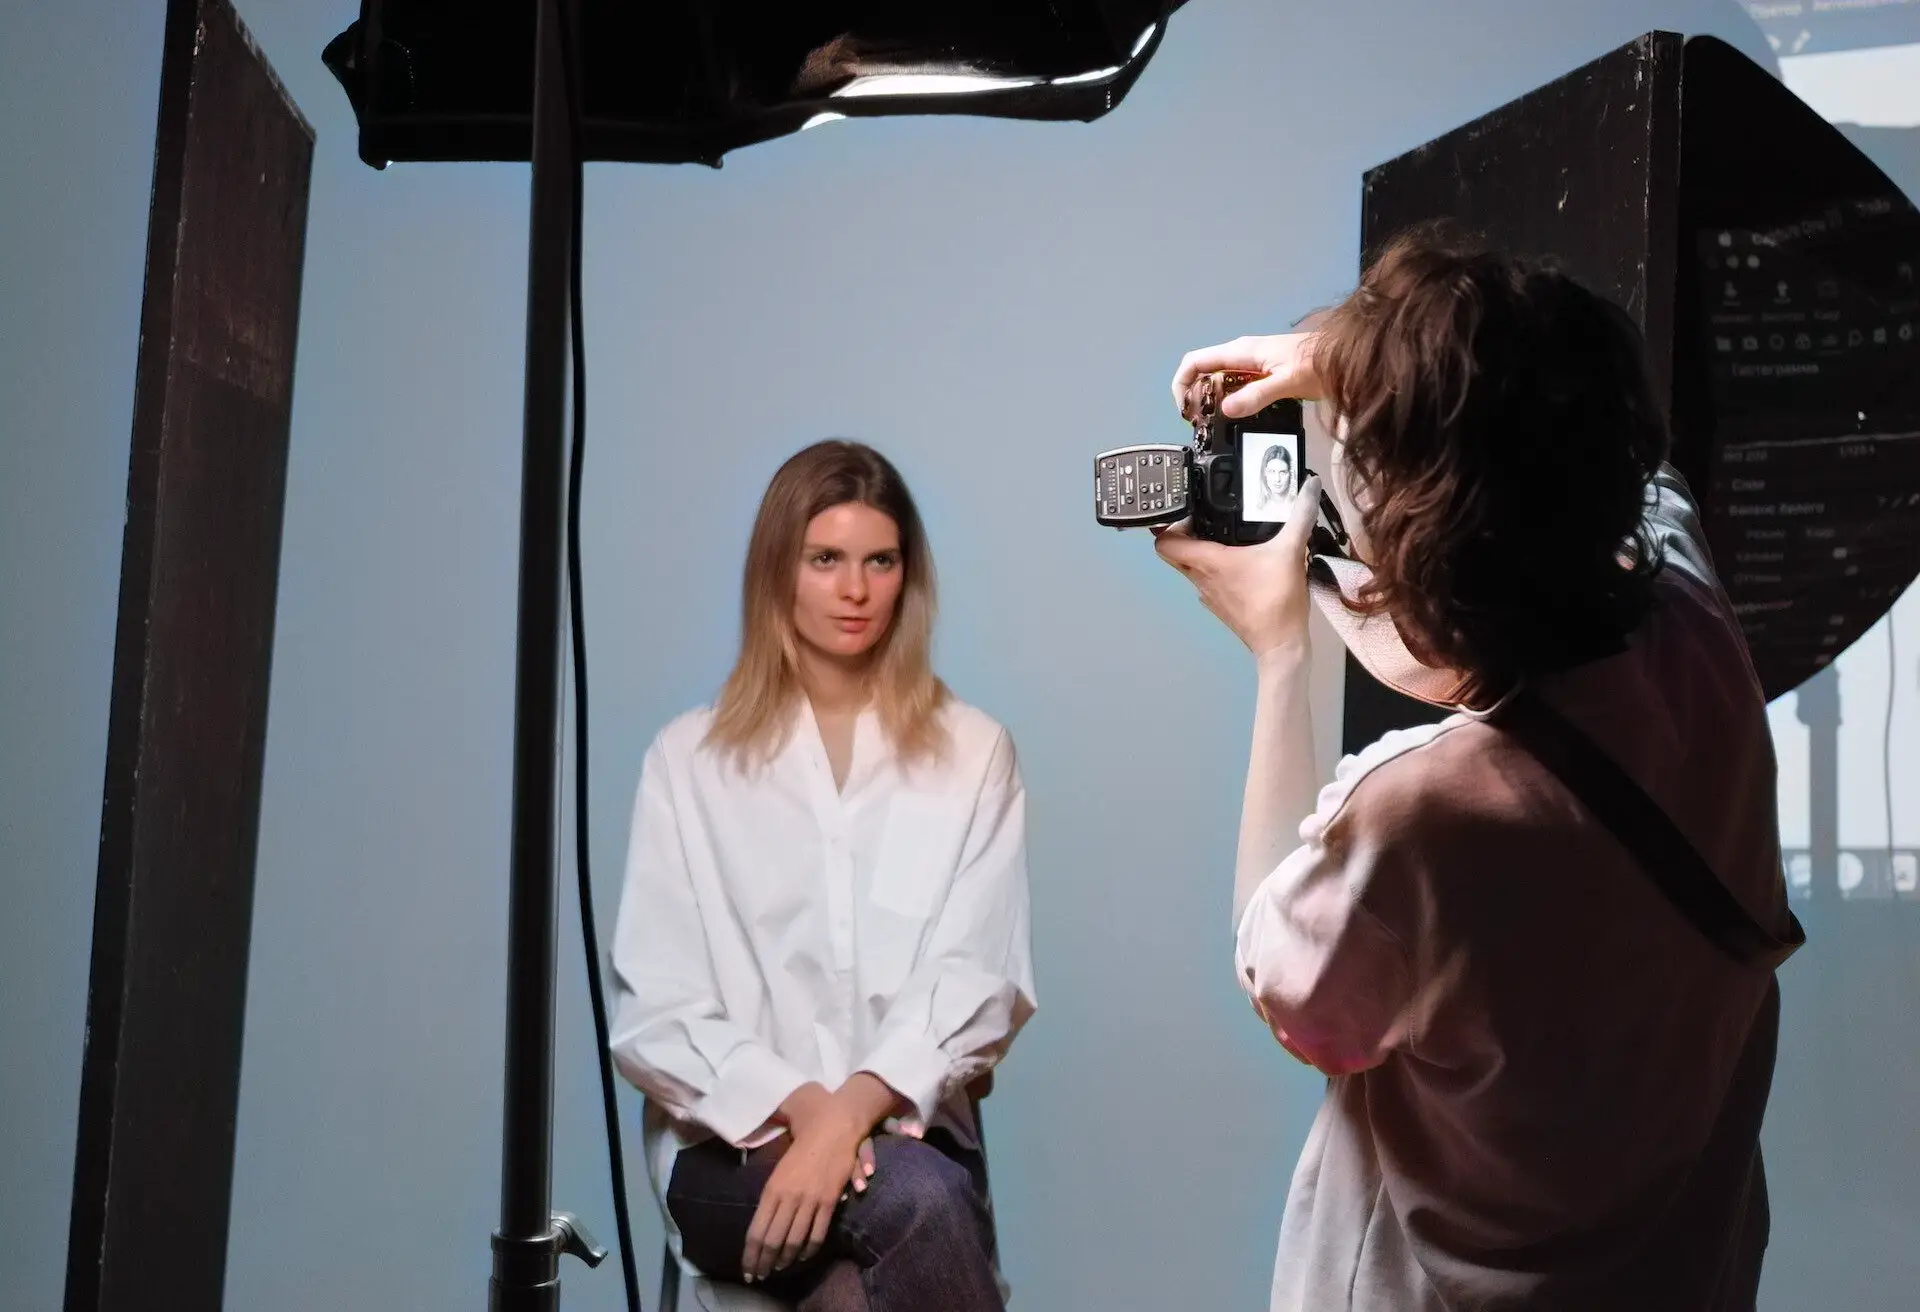 A model taking her headshot photos in New York